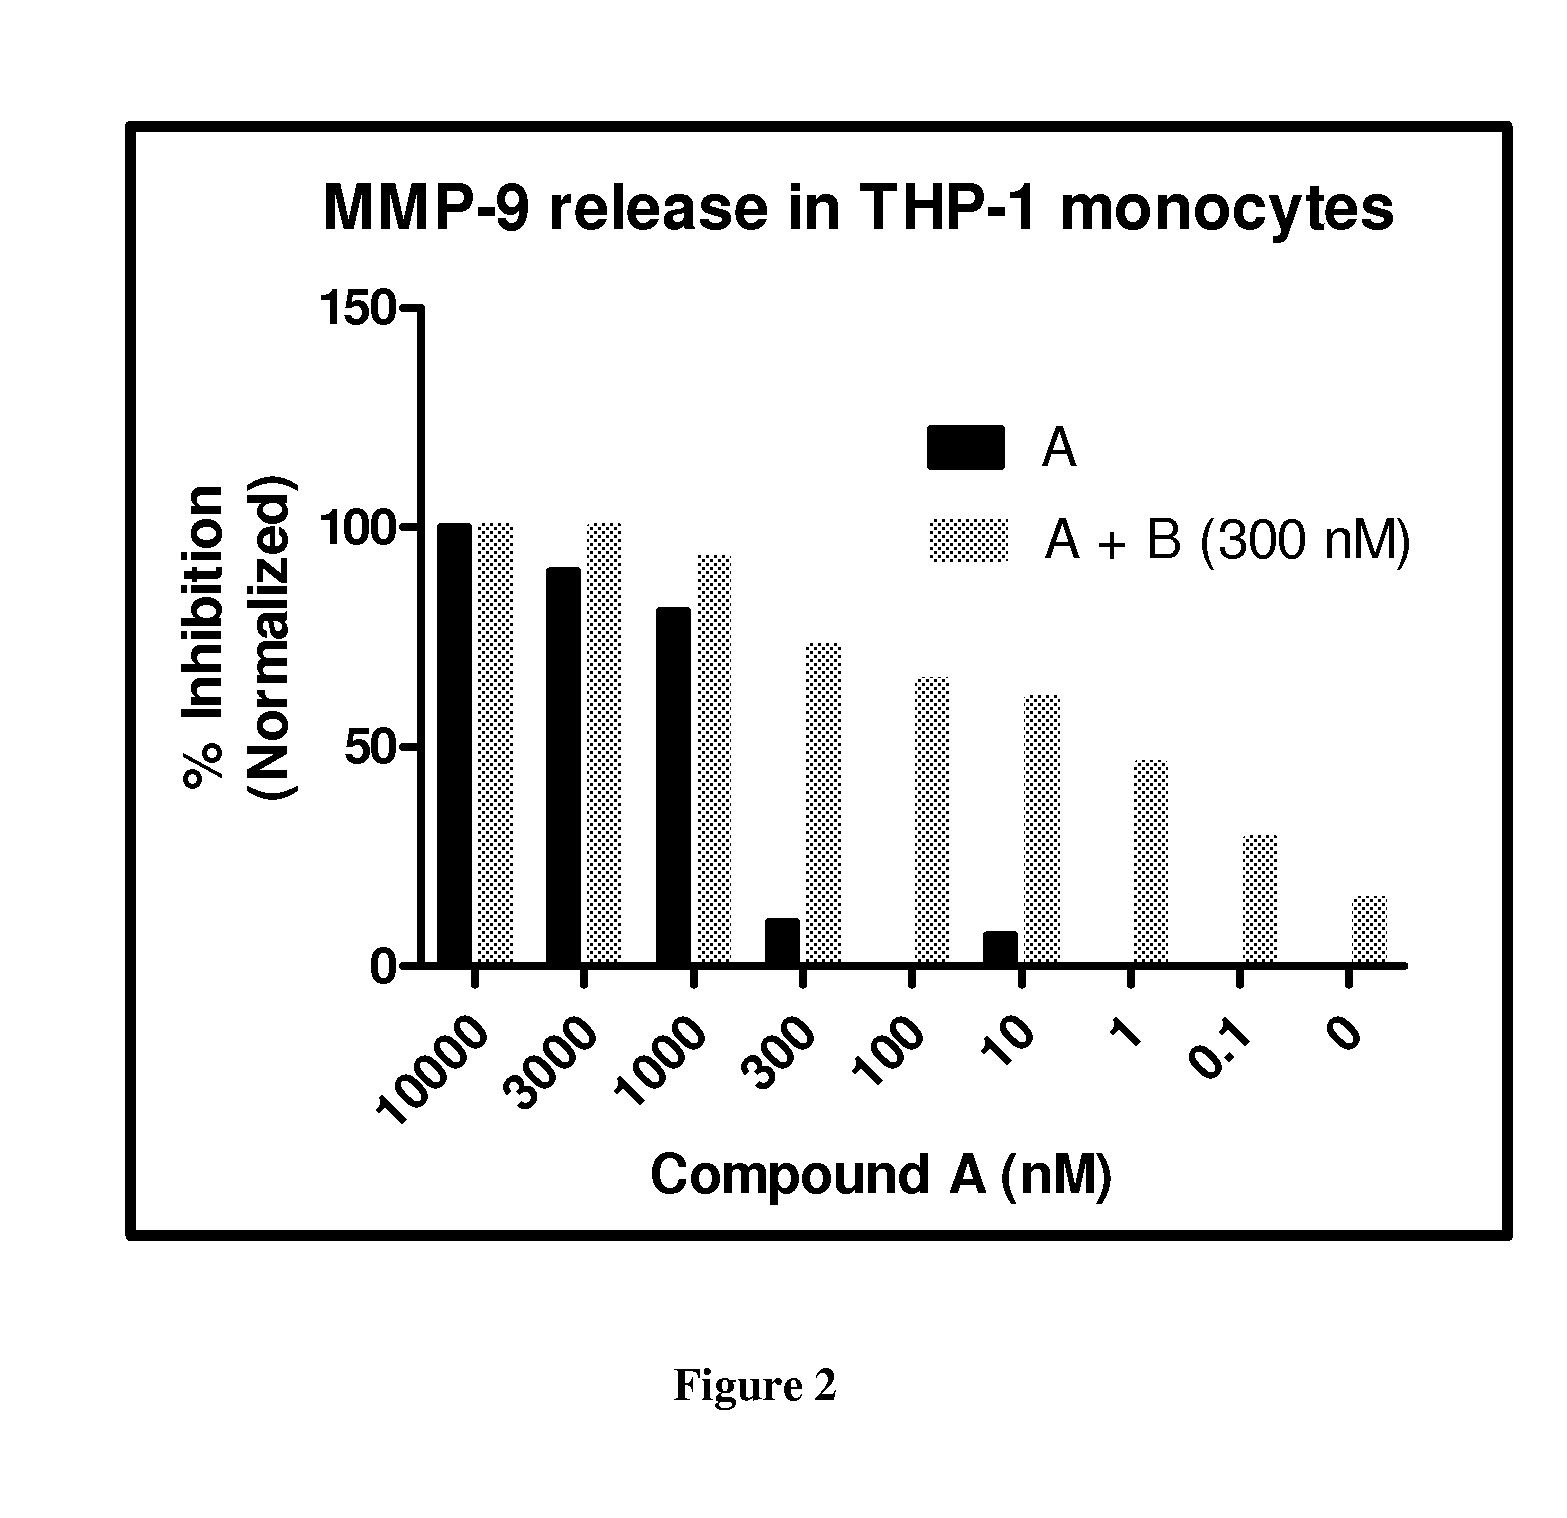 Pharmaceutical compositions containing a pde4 inhibitor and a pi3 delta or dual pi3 delta-gamma kinase inhibitor